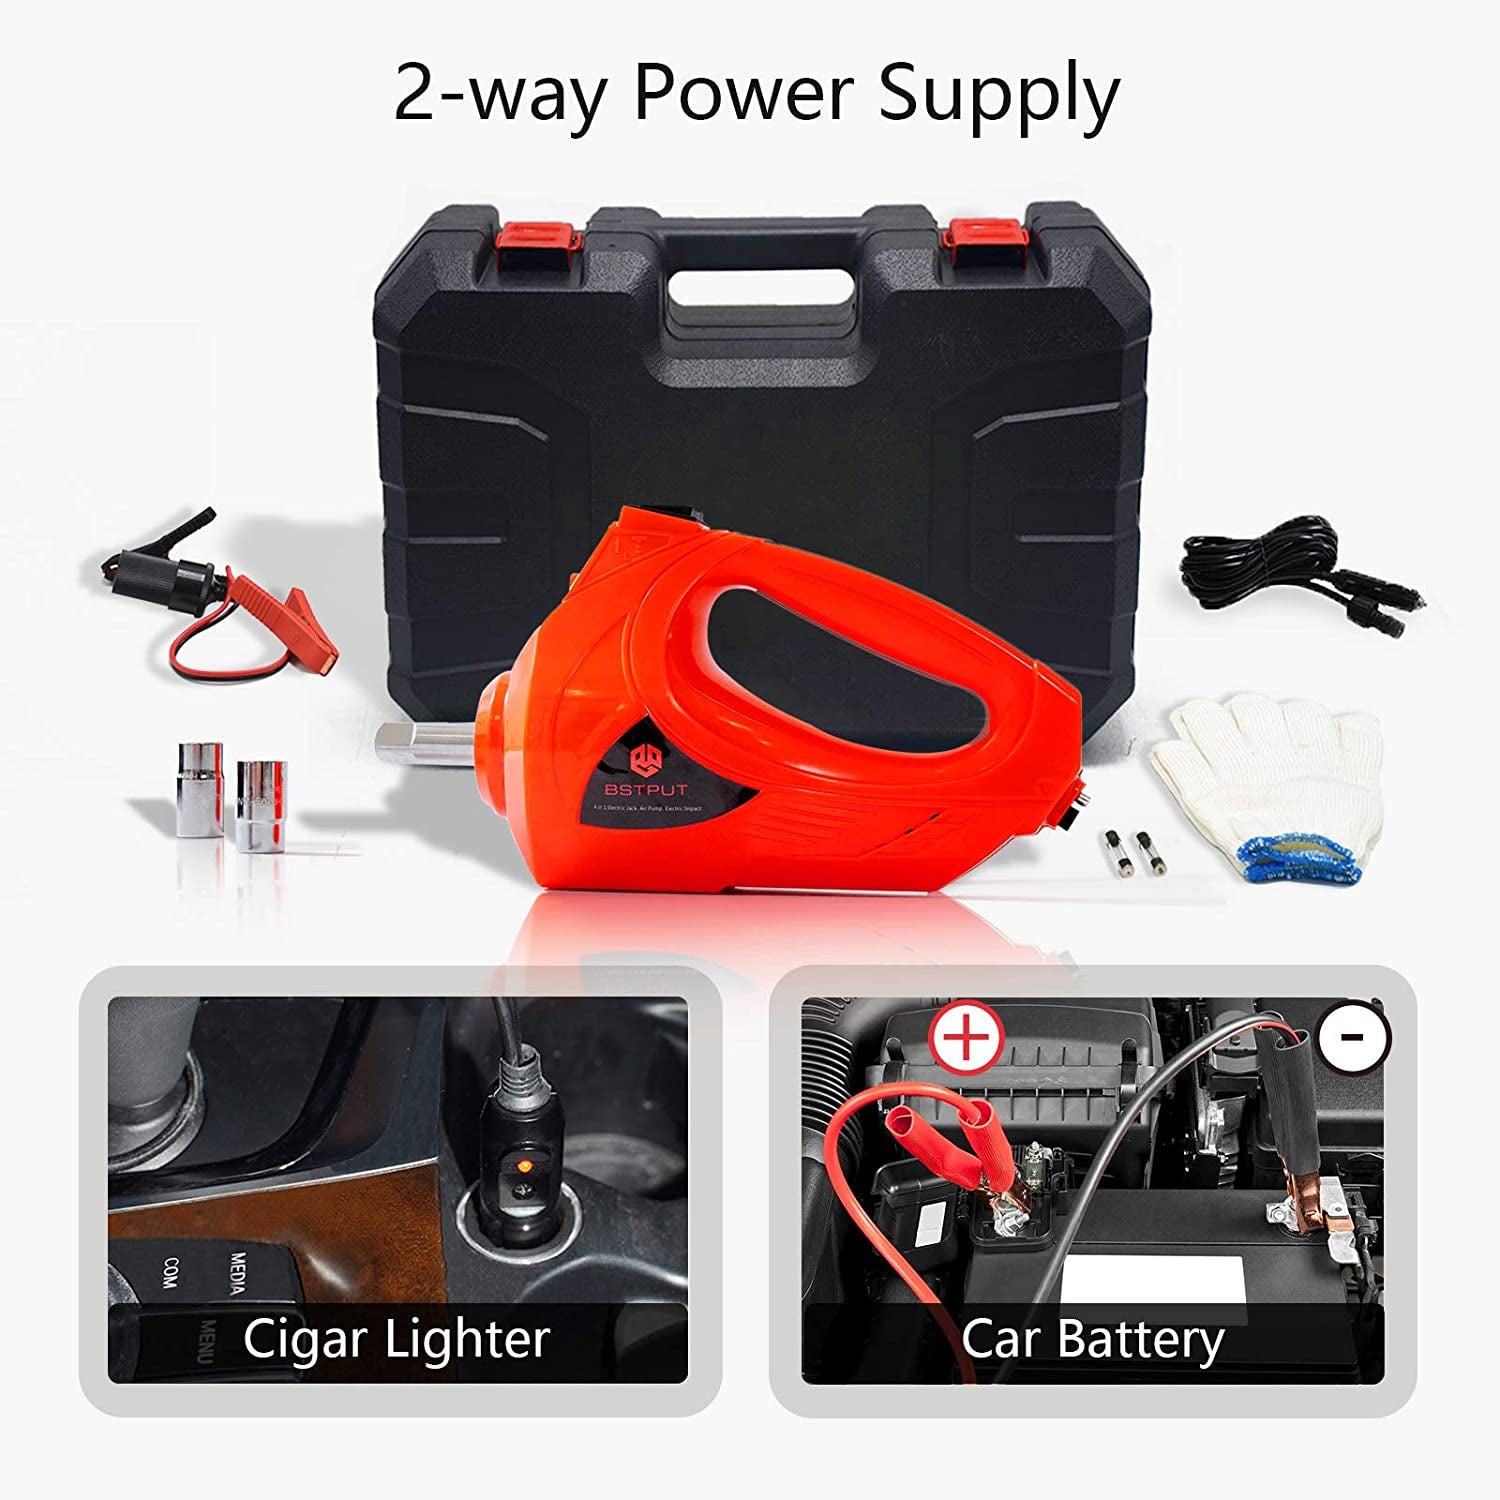 E-HEELP, E-HEELP Electric Impact Wrench 12V 480N.M Emergency Tool Kit for Car Tire Changes